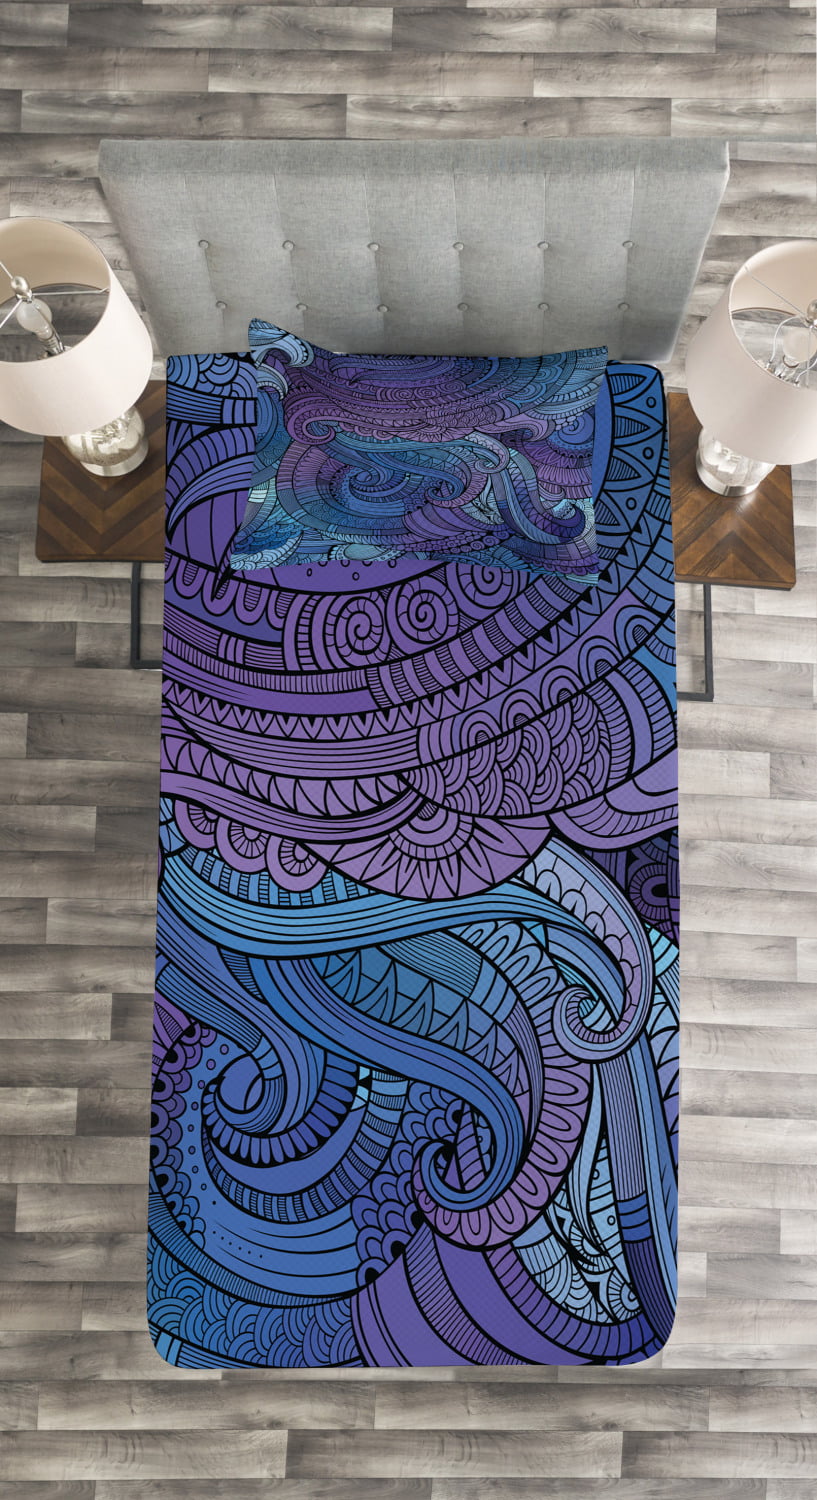 Abstract Bedspread Set Queen Size, Ocean Inspired Graphic Arabesque Paisley  Swirled Hand Drawn Ethnic Artwork Print, Quilted Piece Decor Coverlet Set  with Pillow Shams, Purple Blue, by Ambesonne